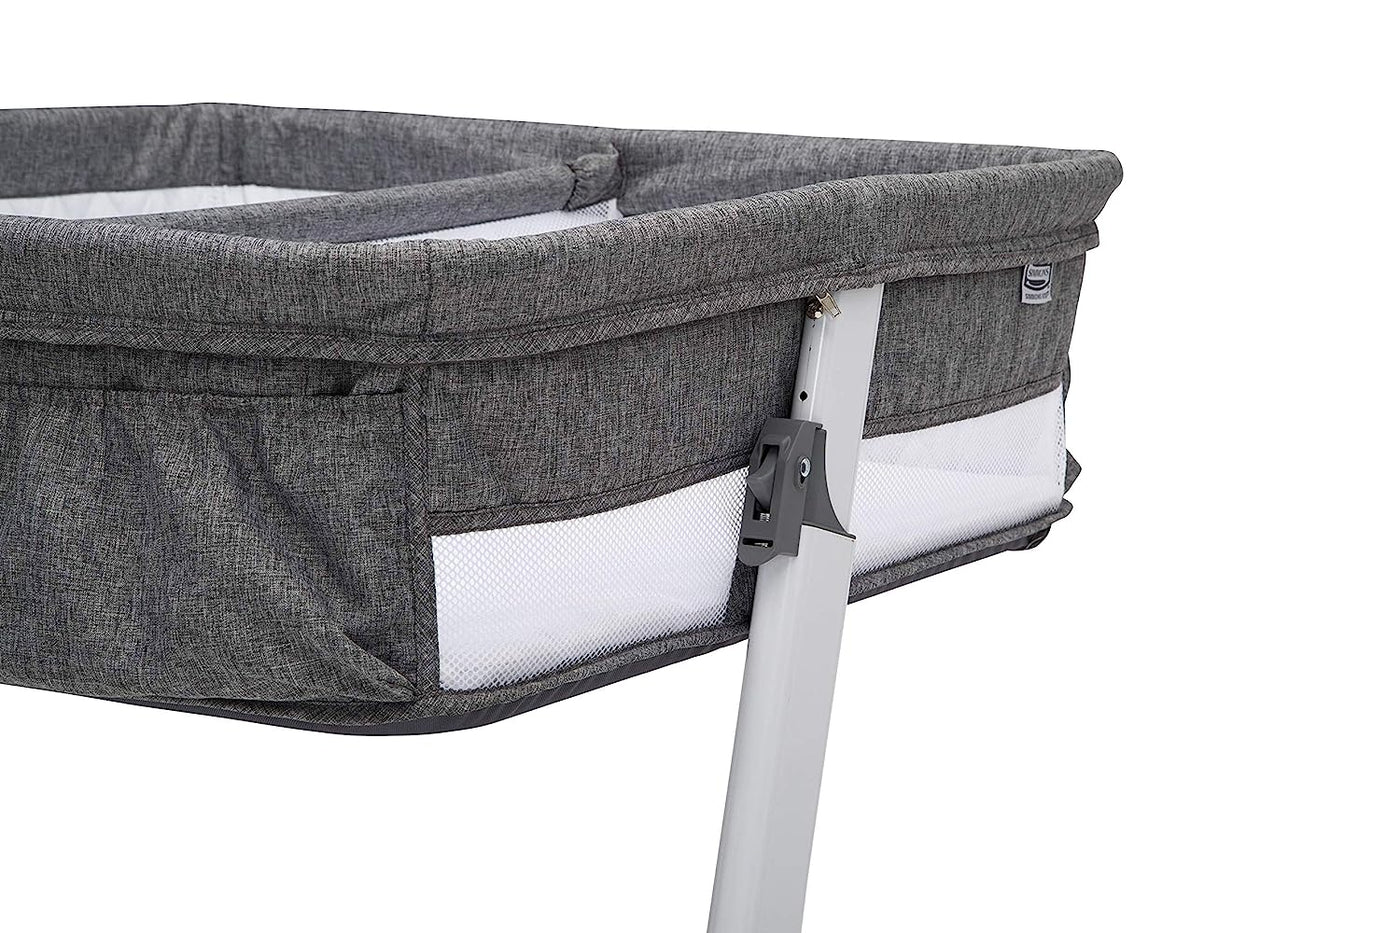 Simmons Kids By The Bed City Sleeper Bassinet for Twins, Grey Tweed - $130